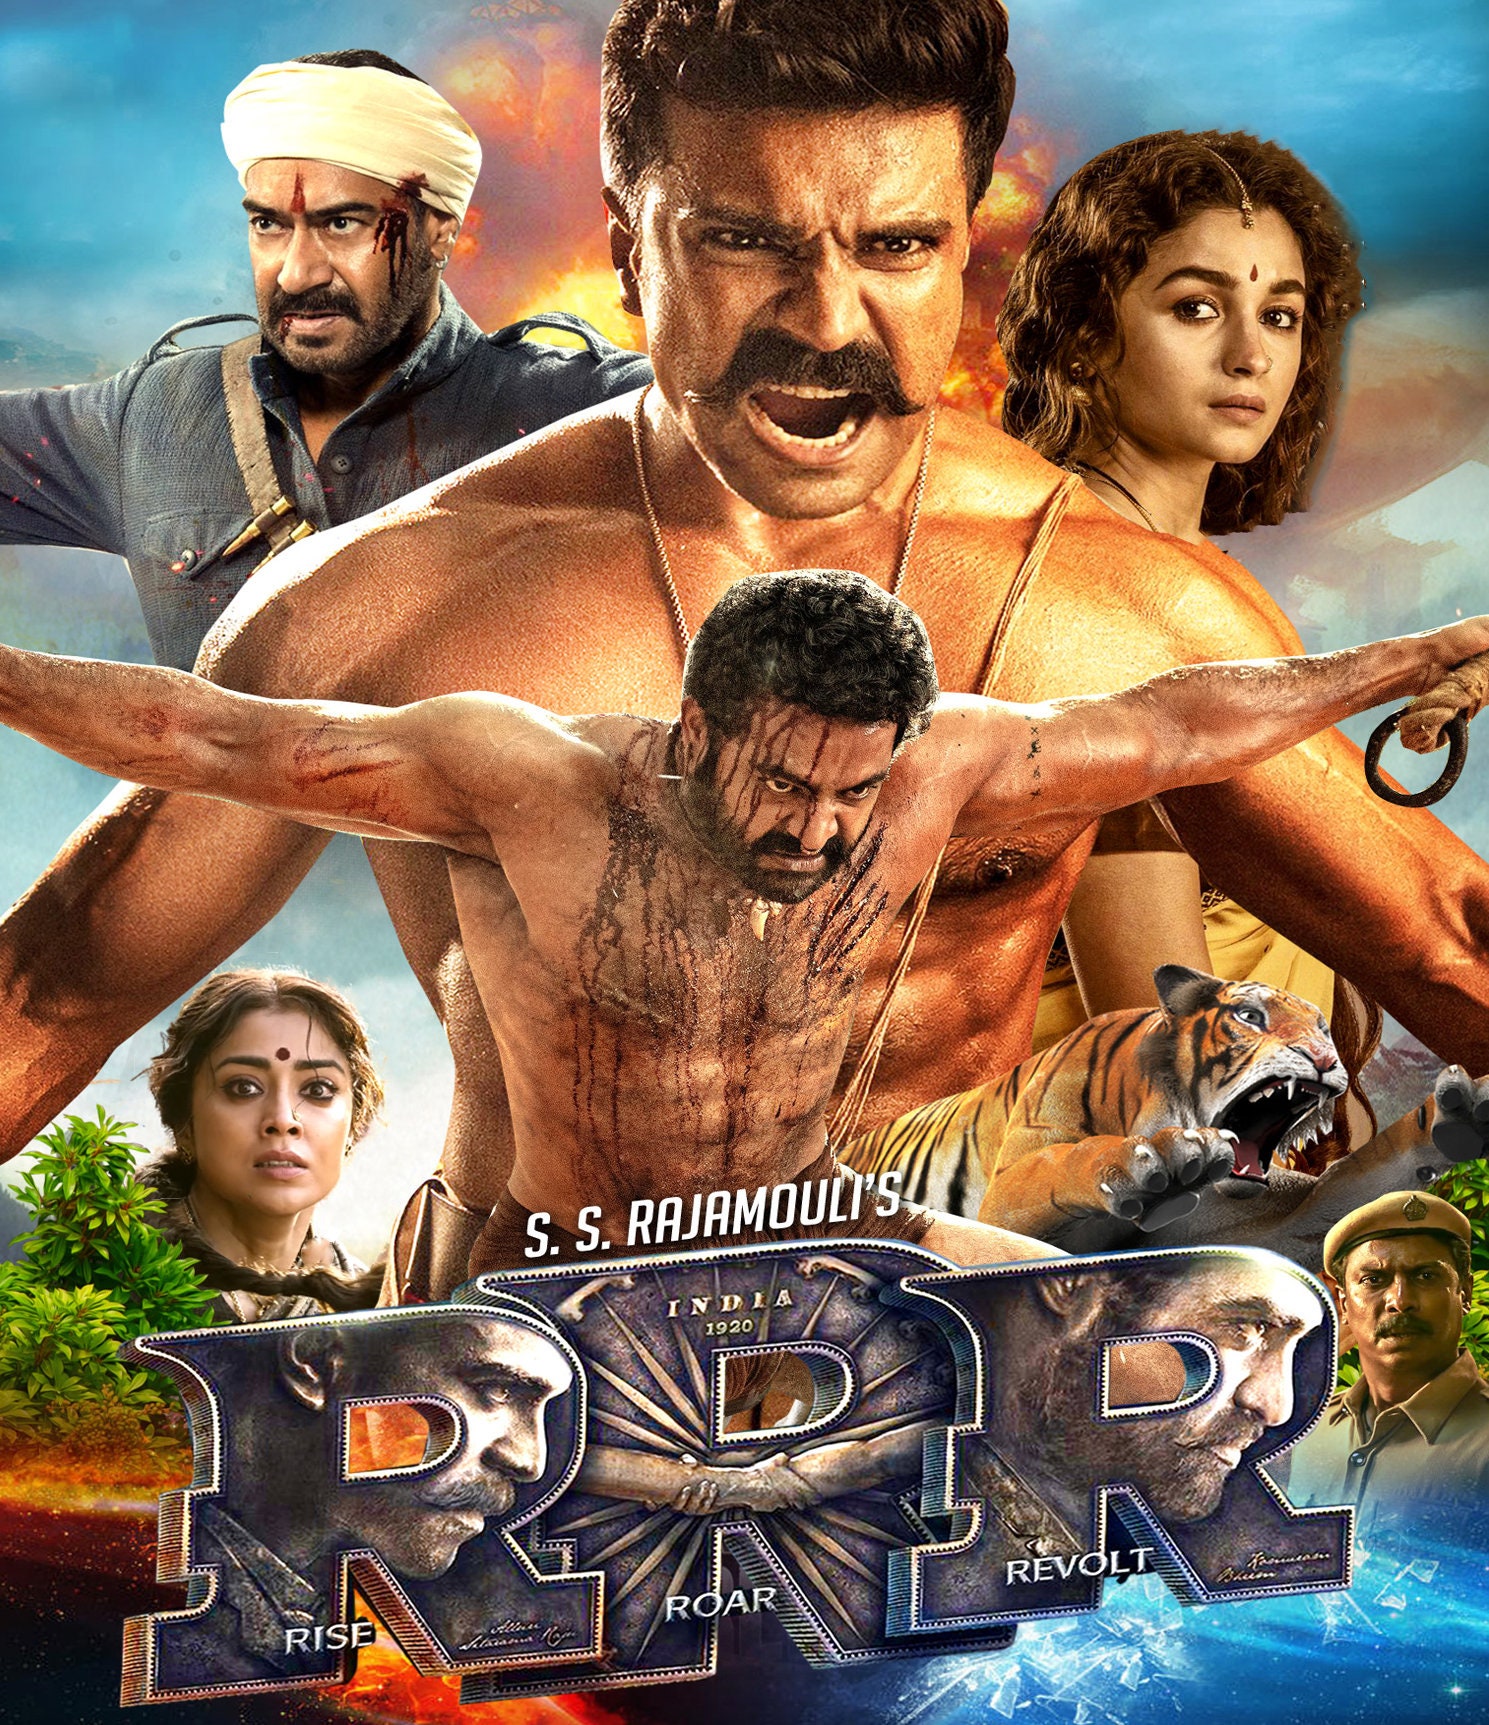 Rrr Bluray Mod Hindi Dubbed With Eng Subs Etsy 日本